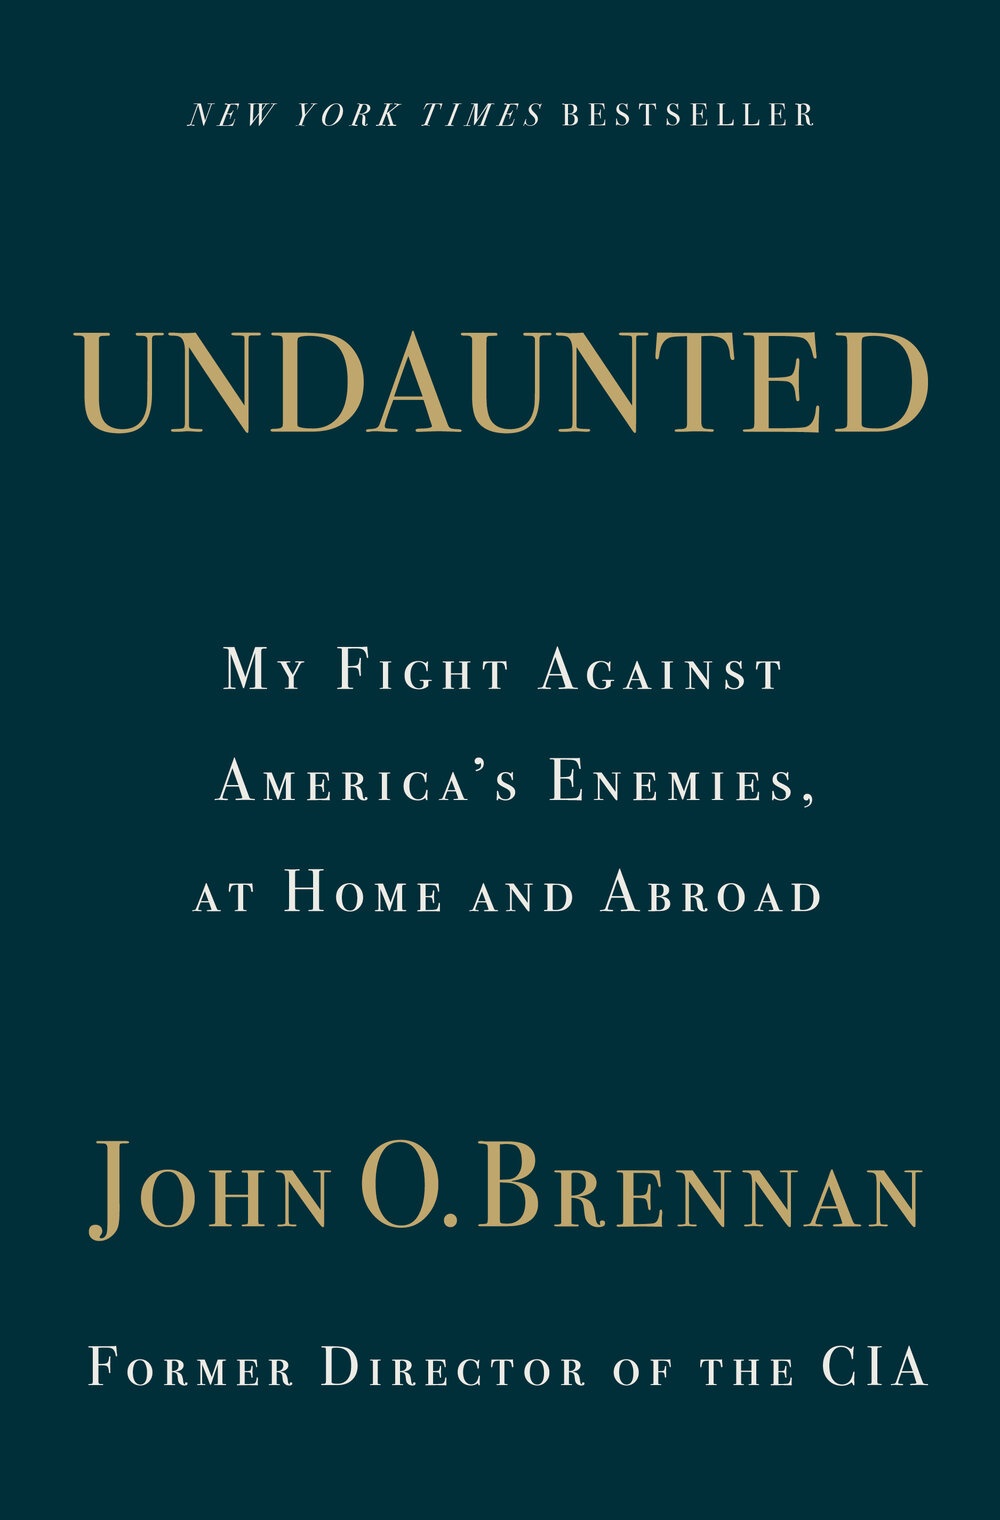 Undaunted: My Fight Against America's Enemies, at Home and Abroad by John O. Brennan